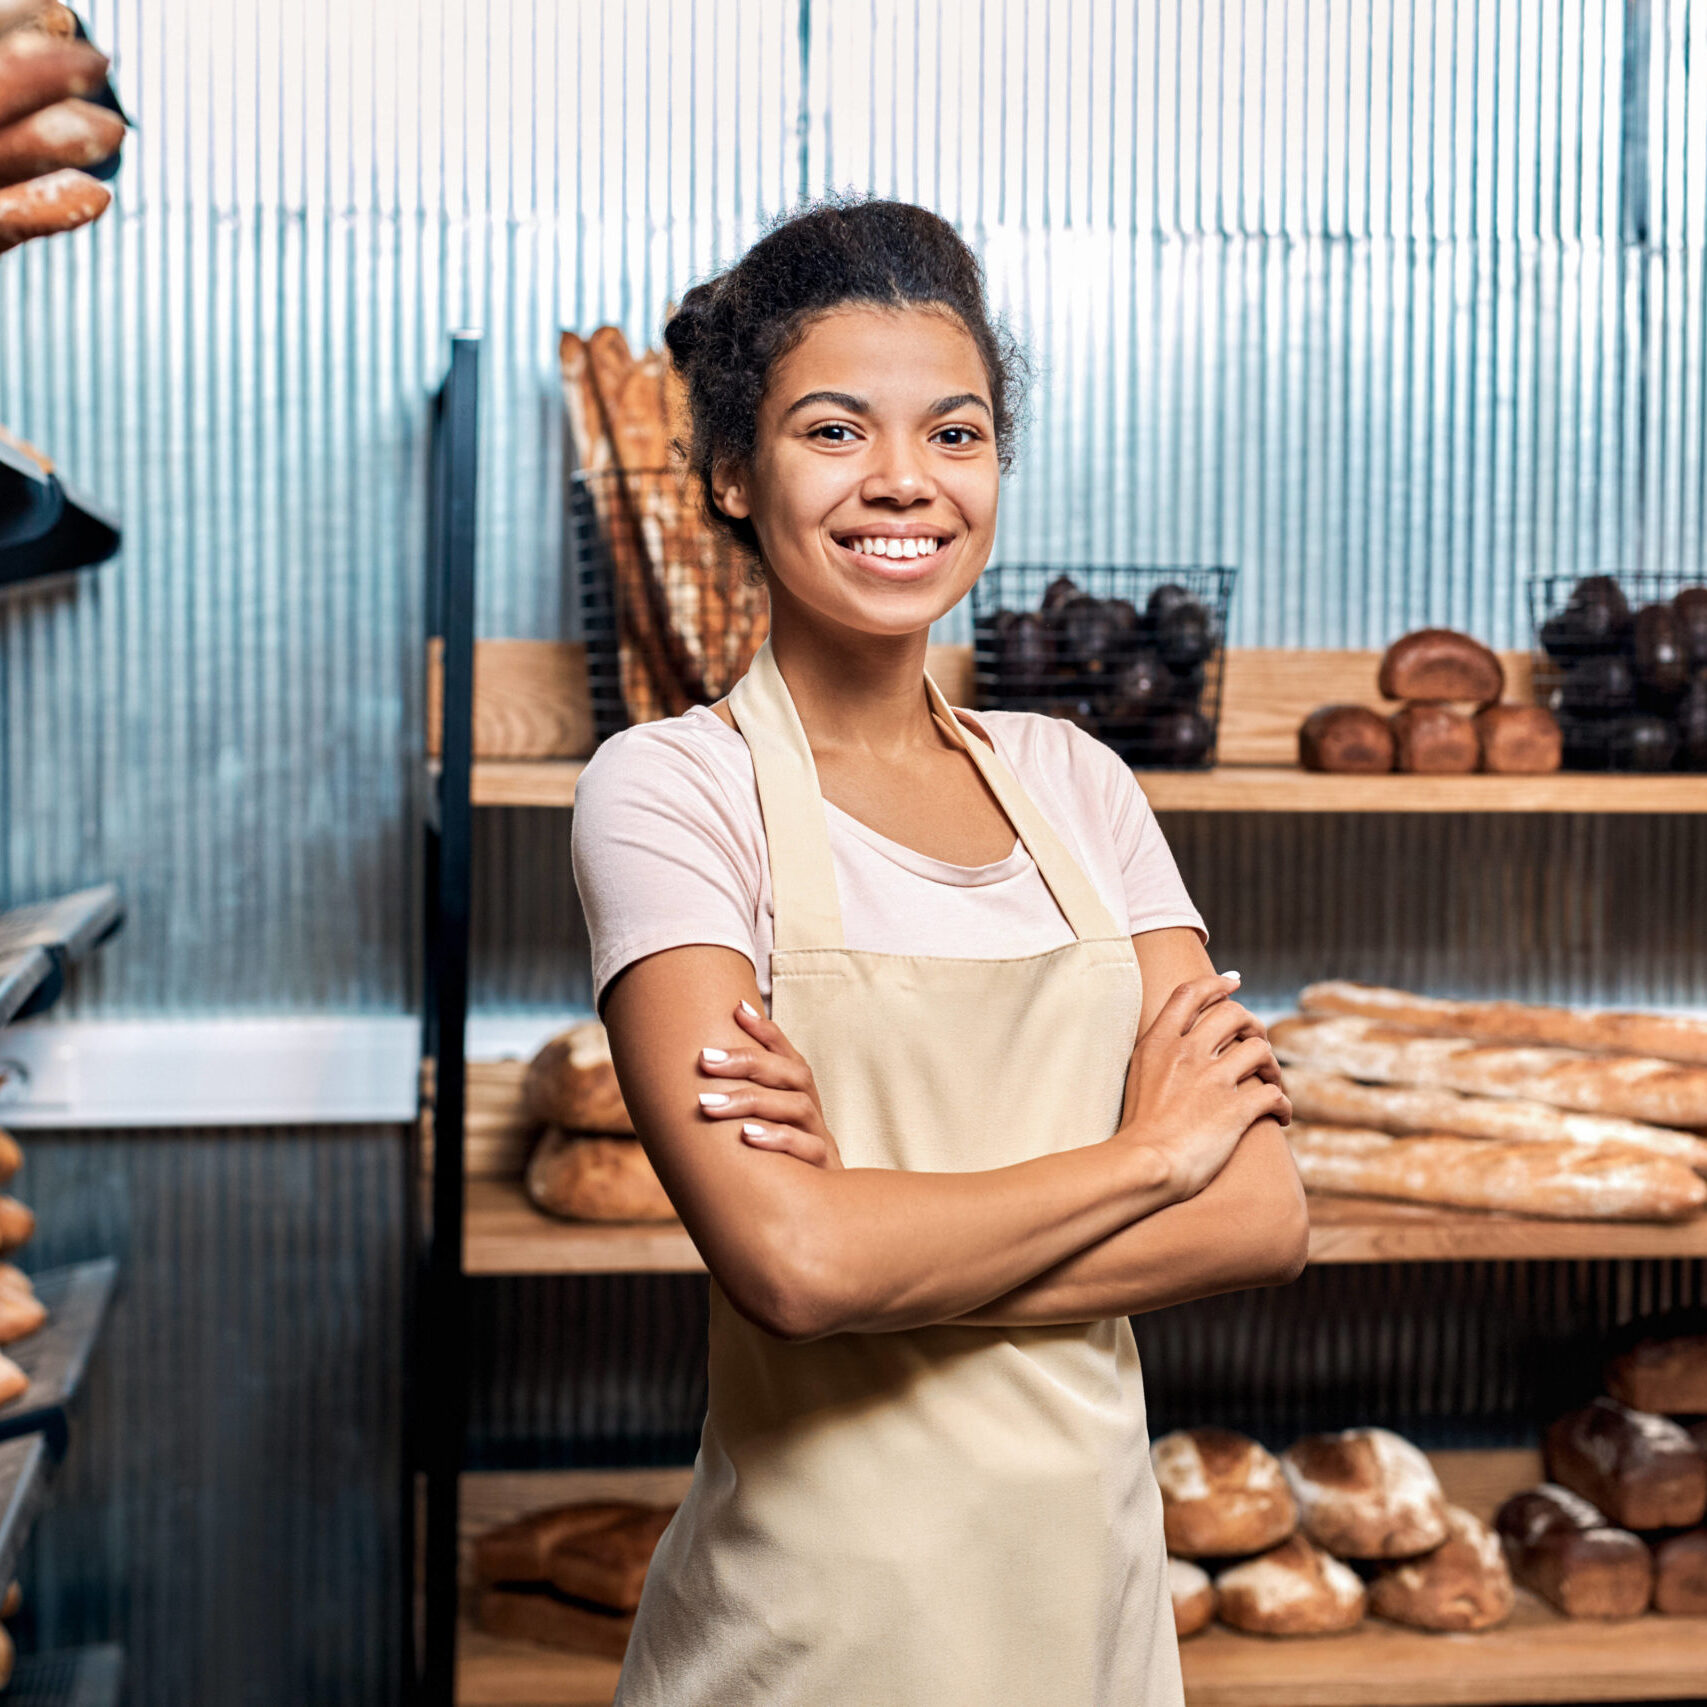 Family business concept. Confident and happy young adult woman working in small bakery, standing near fresh wholegrain bread crossed hands on chest